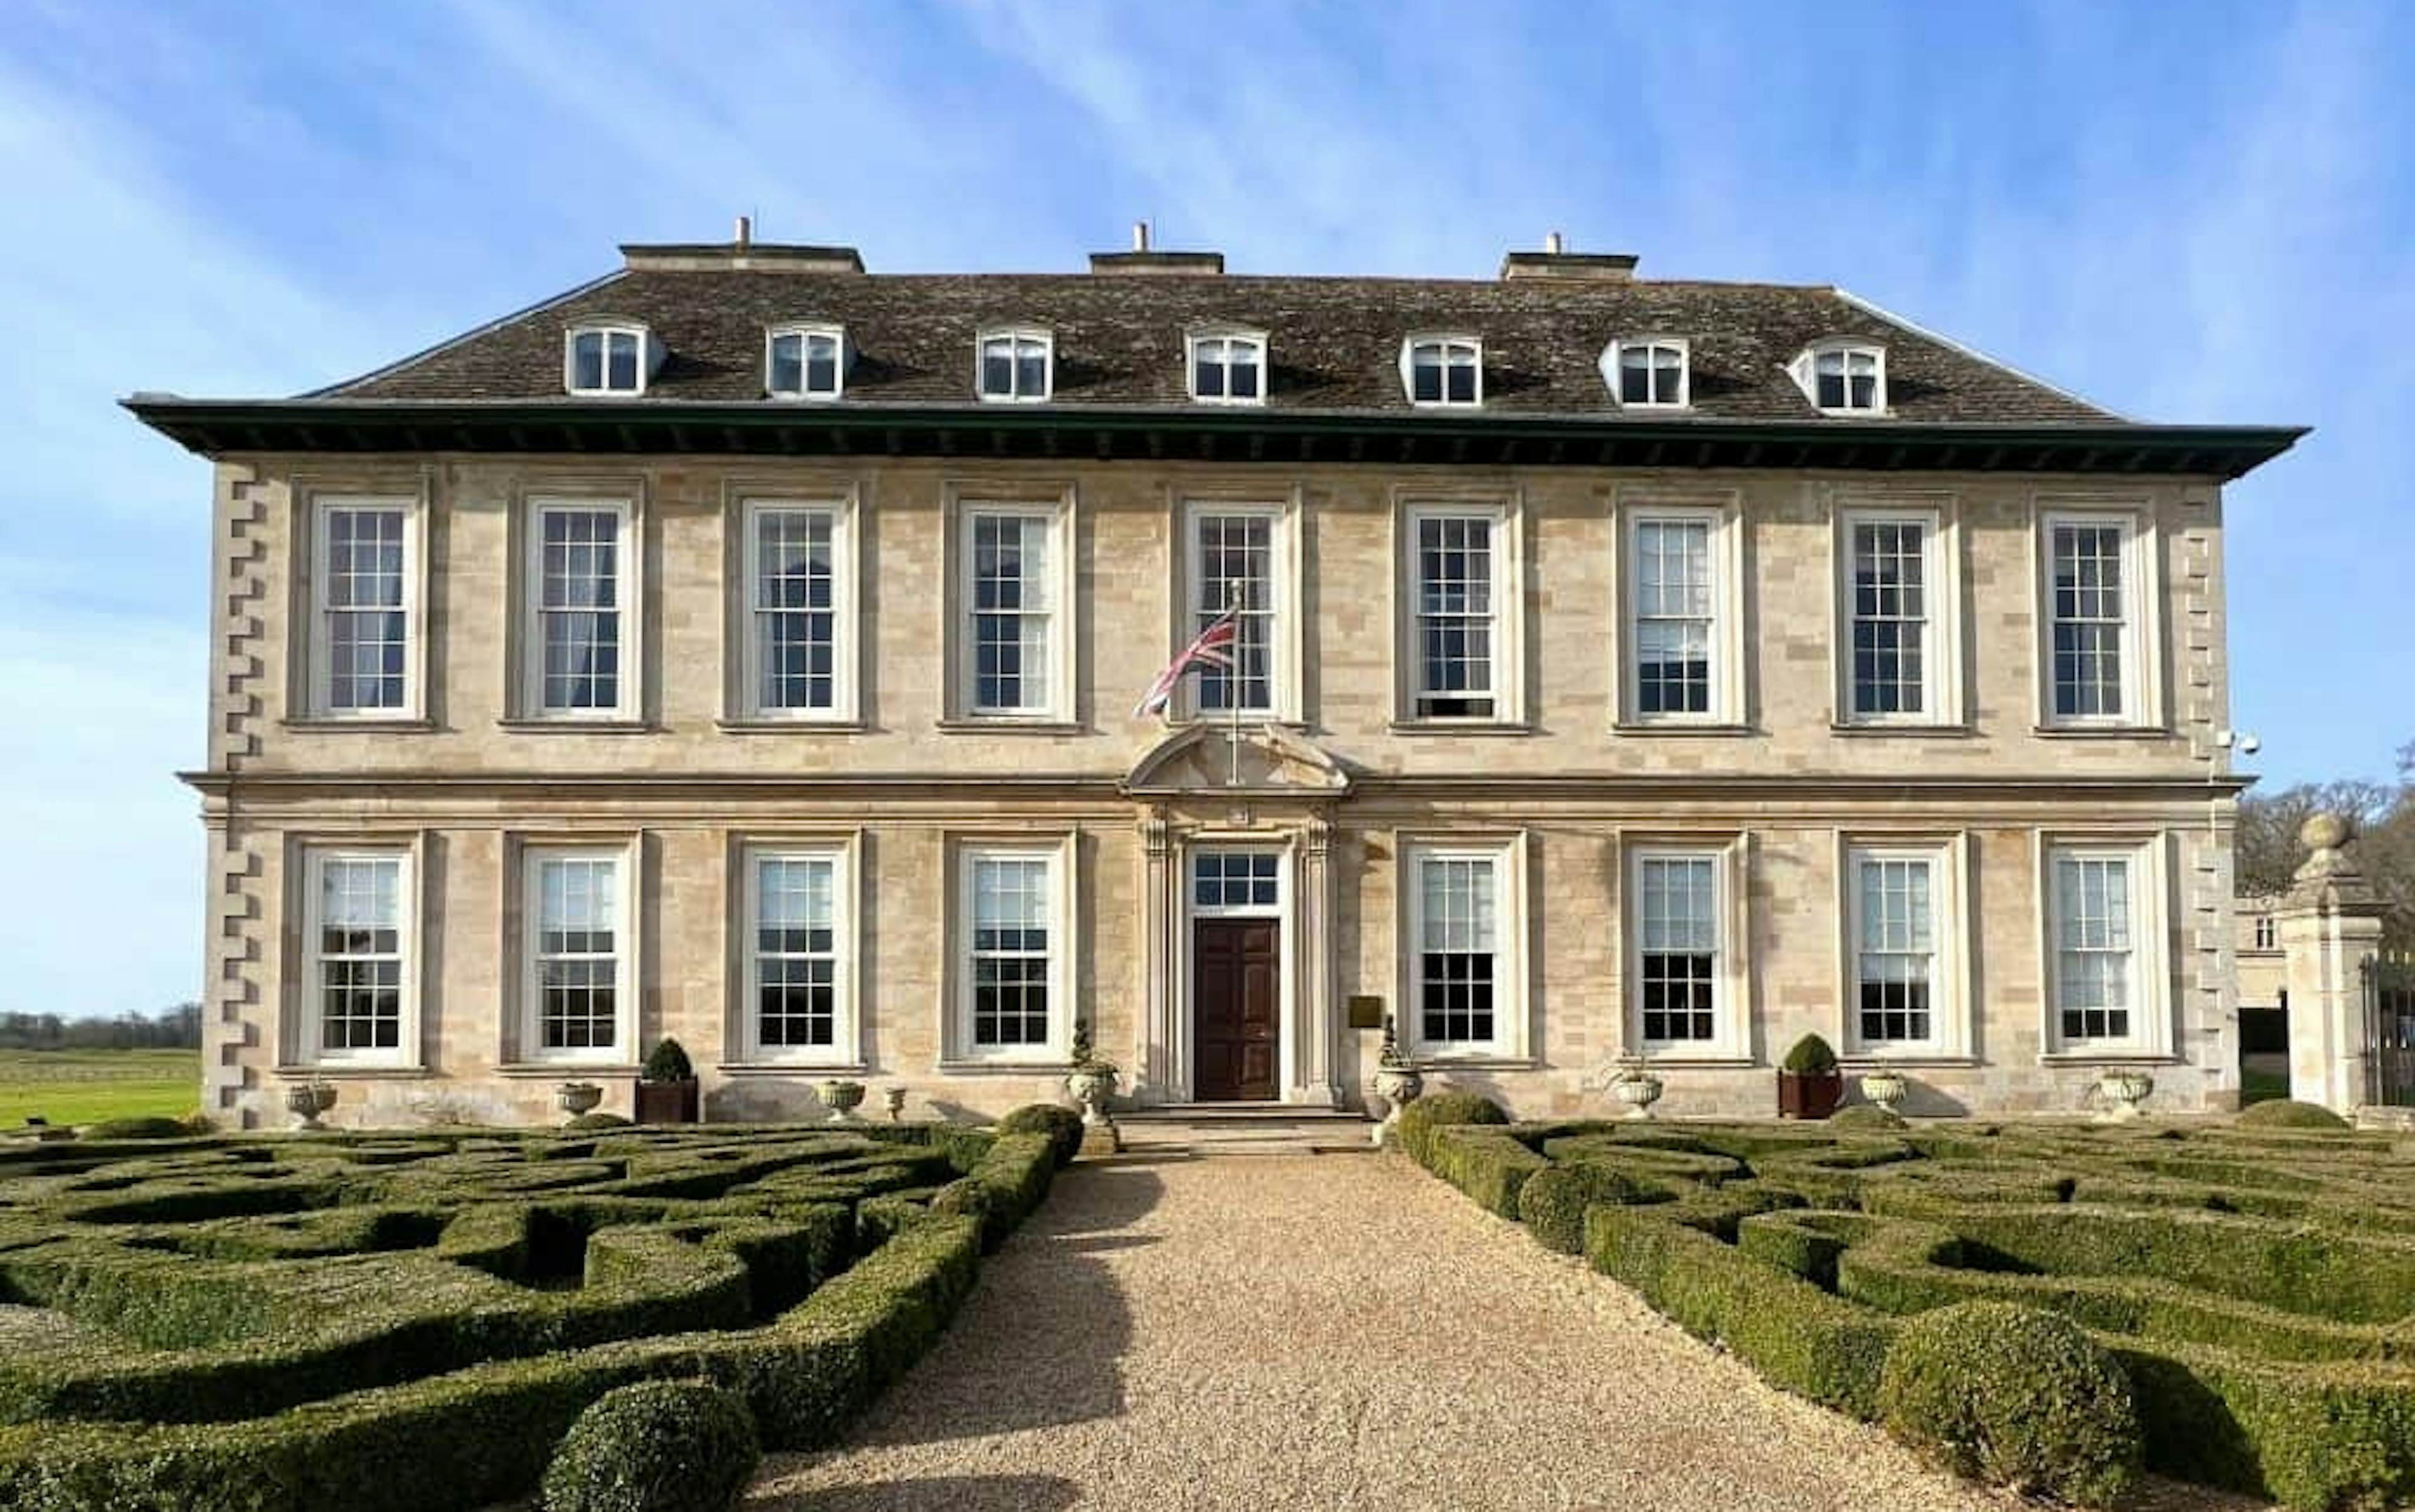 STAPLEFORD PARK: A BEAUTIFUL COUNTRY ...